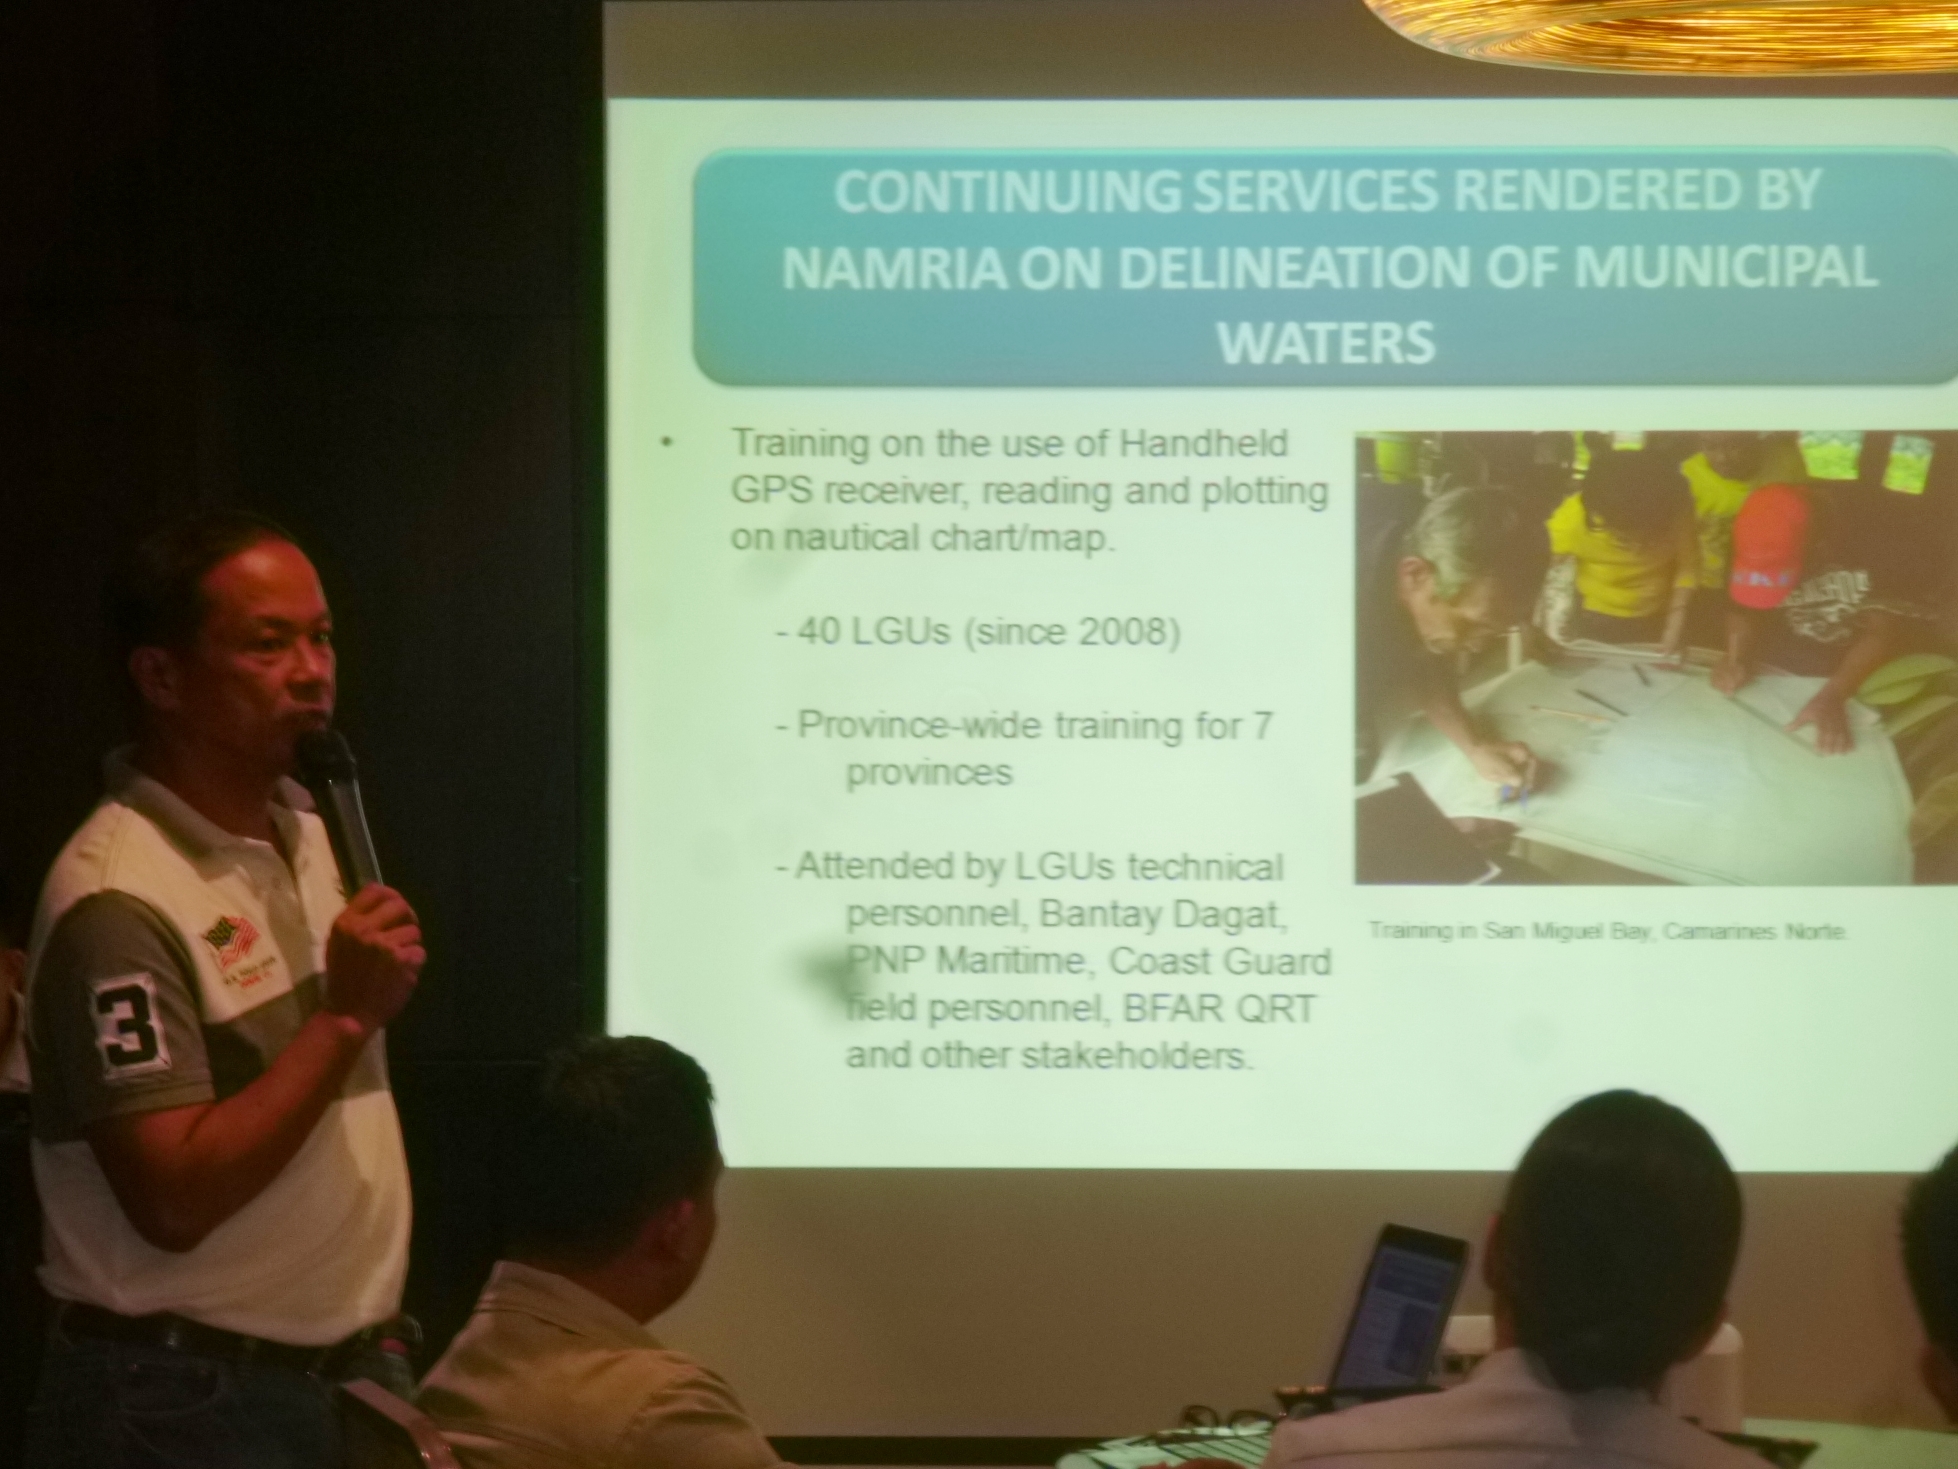  Engr. Mario Princer reports on the status of municipal water delineation.